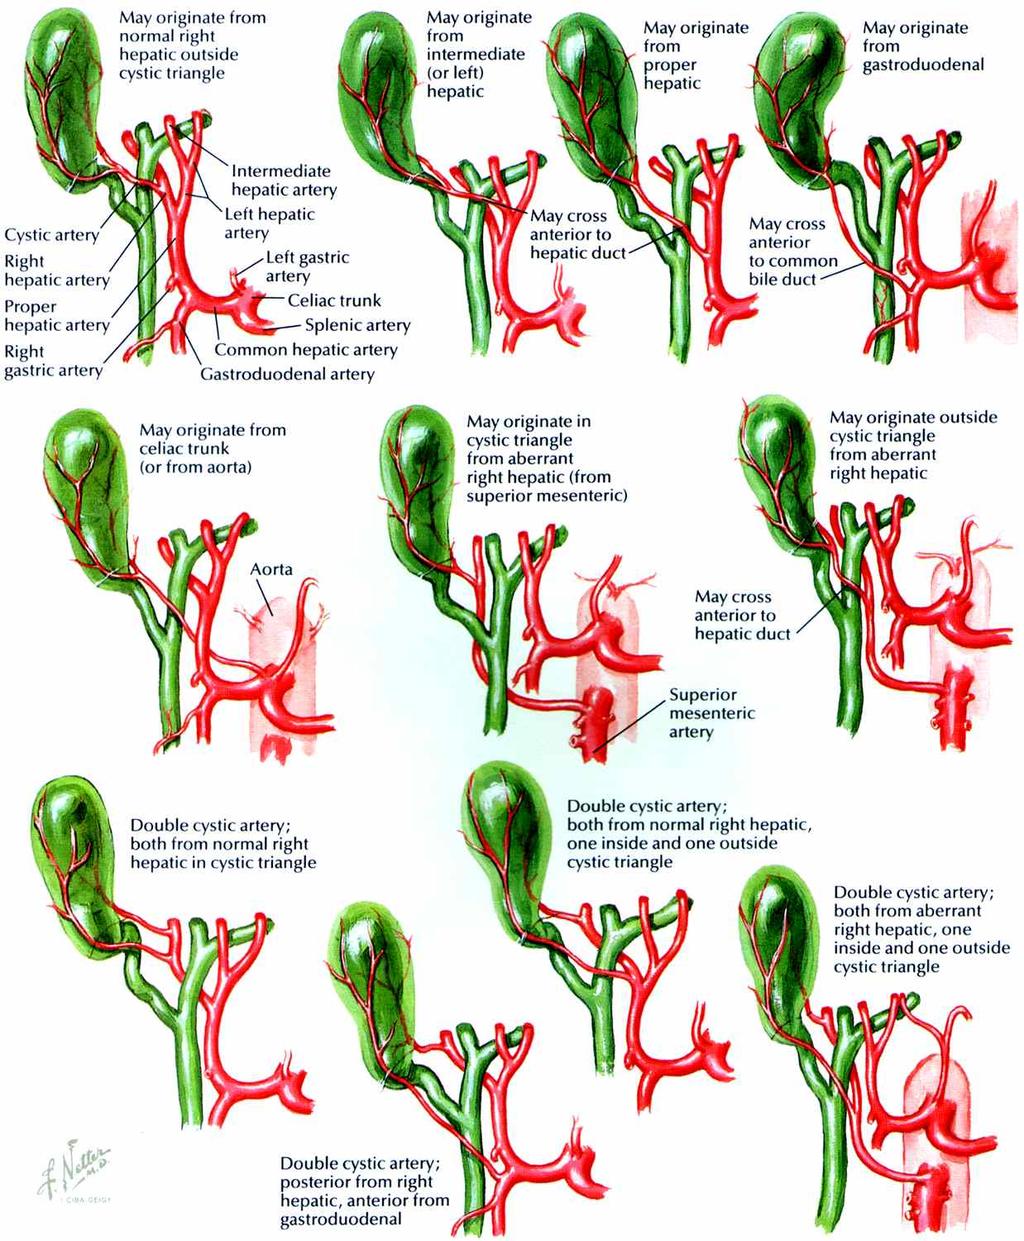 Cystic Artery Variations Arteries originating to the left of Calot s triangle usually cross the ducts anteriorly May originate from right hepatic, left